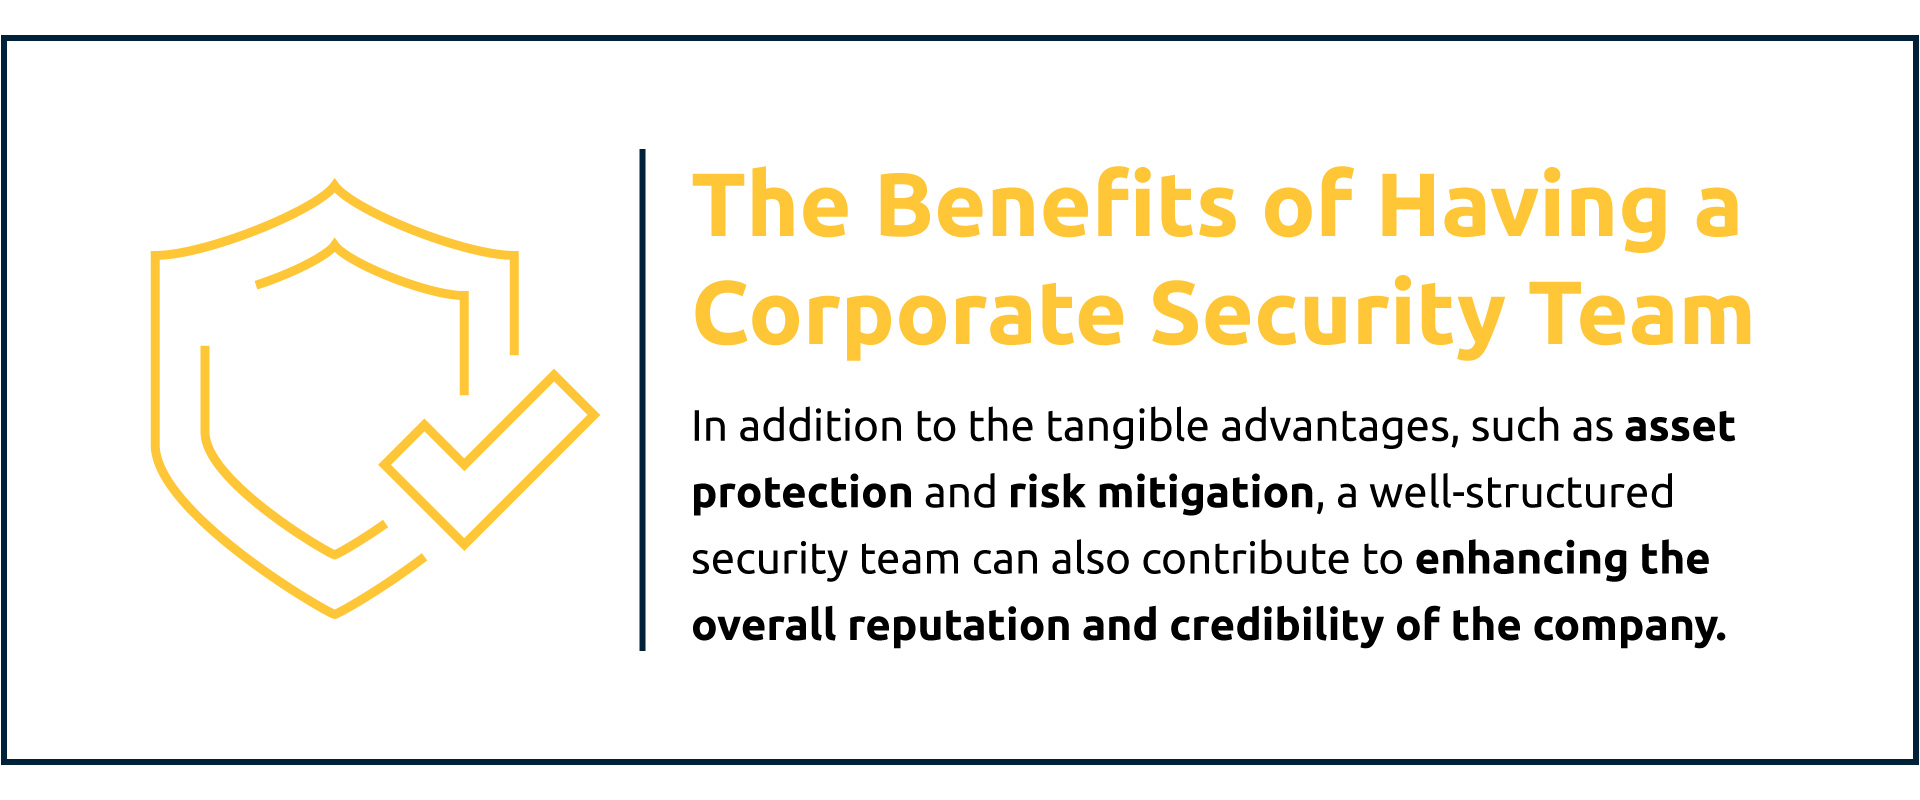 The Benefits of Having a Corporate Security Team